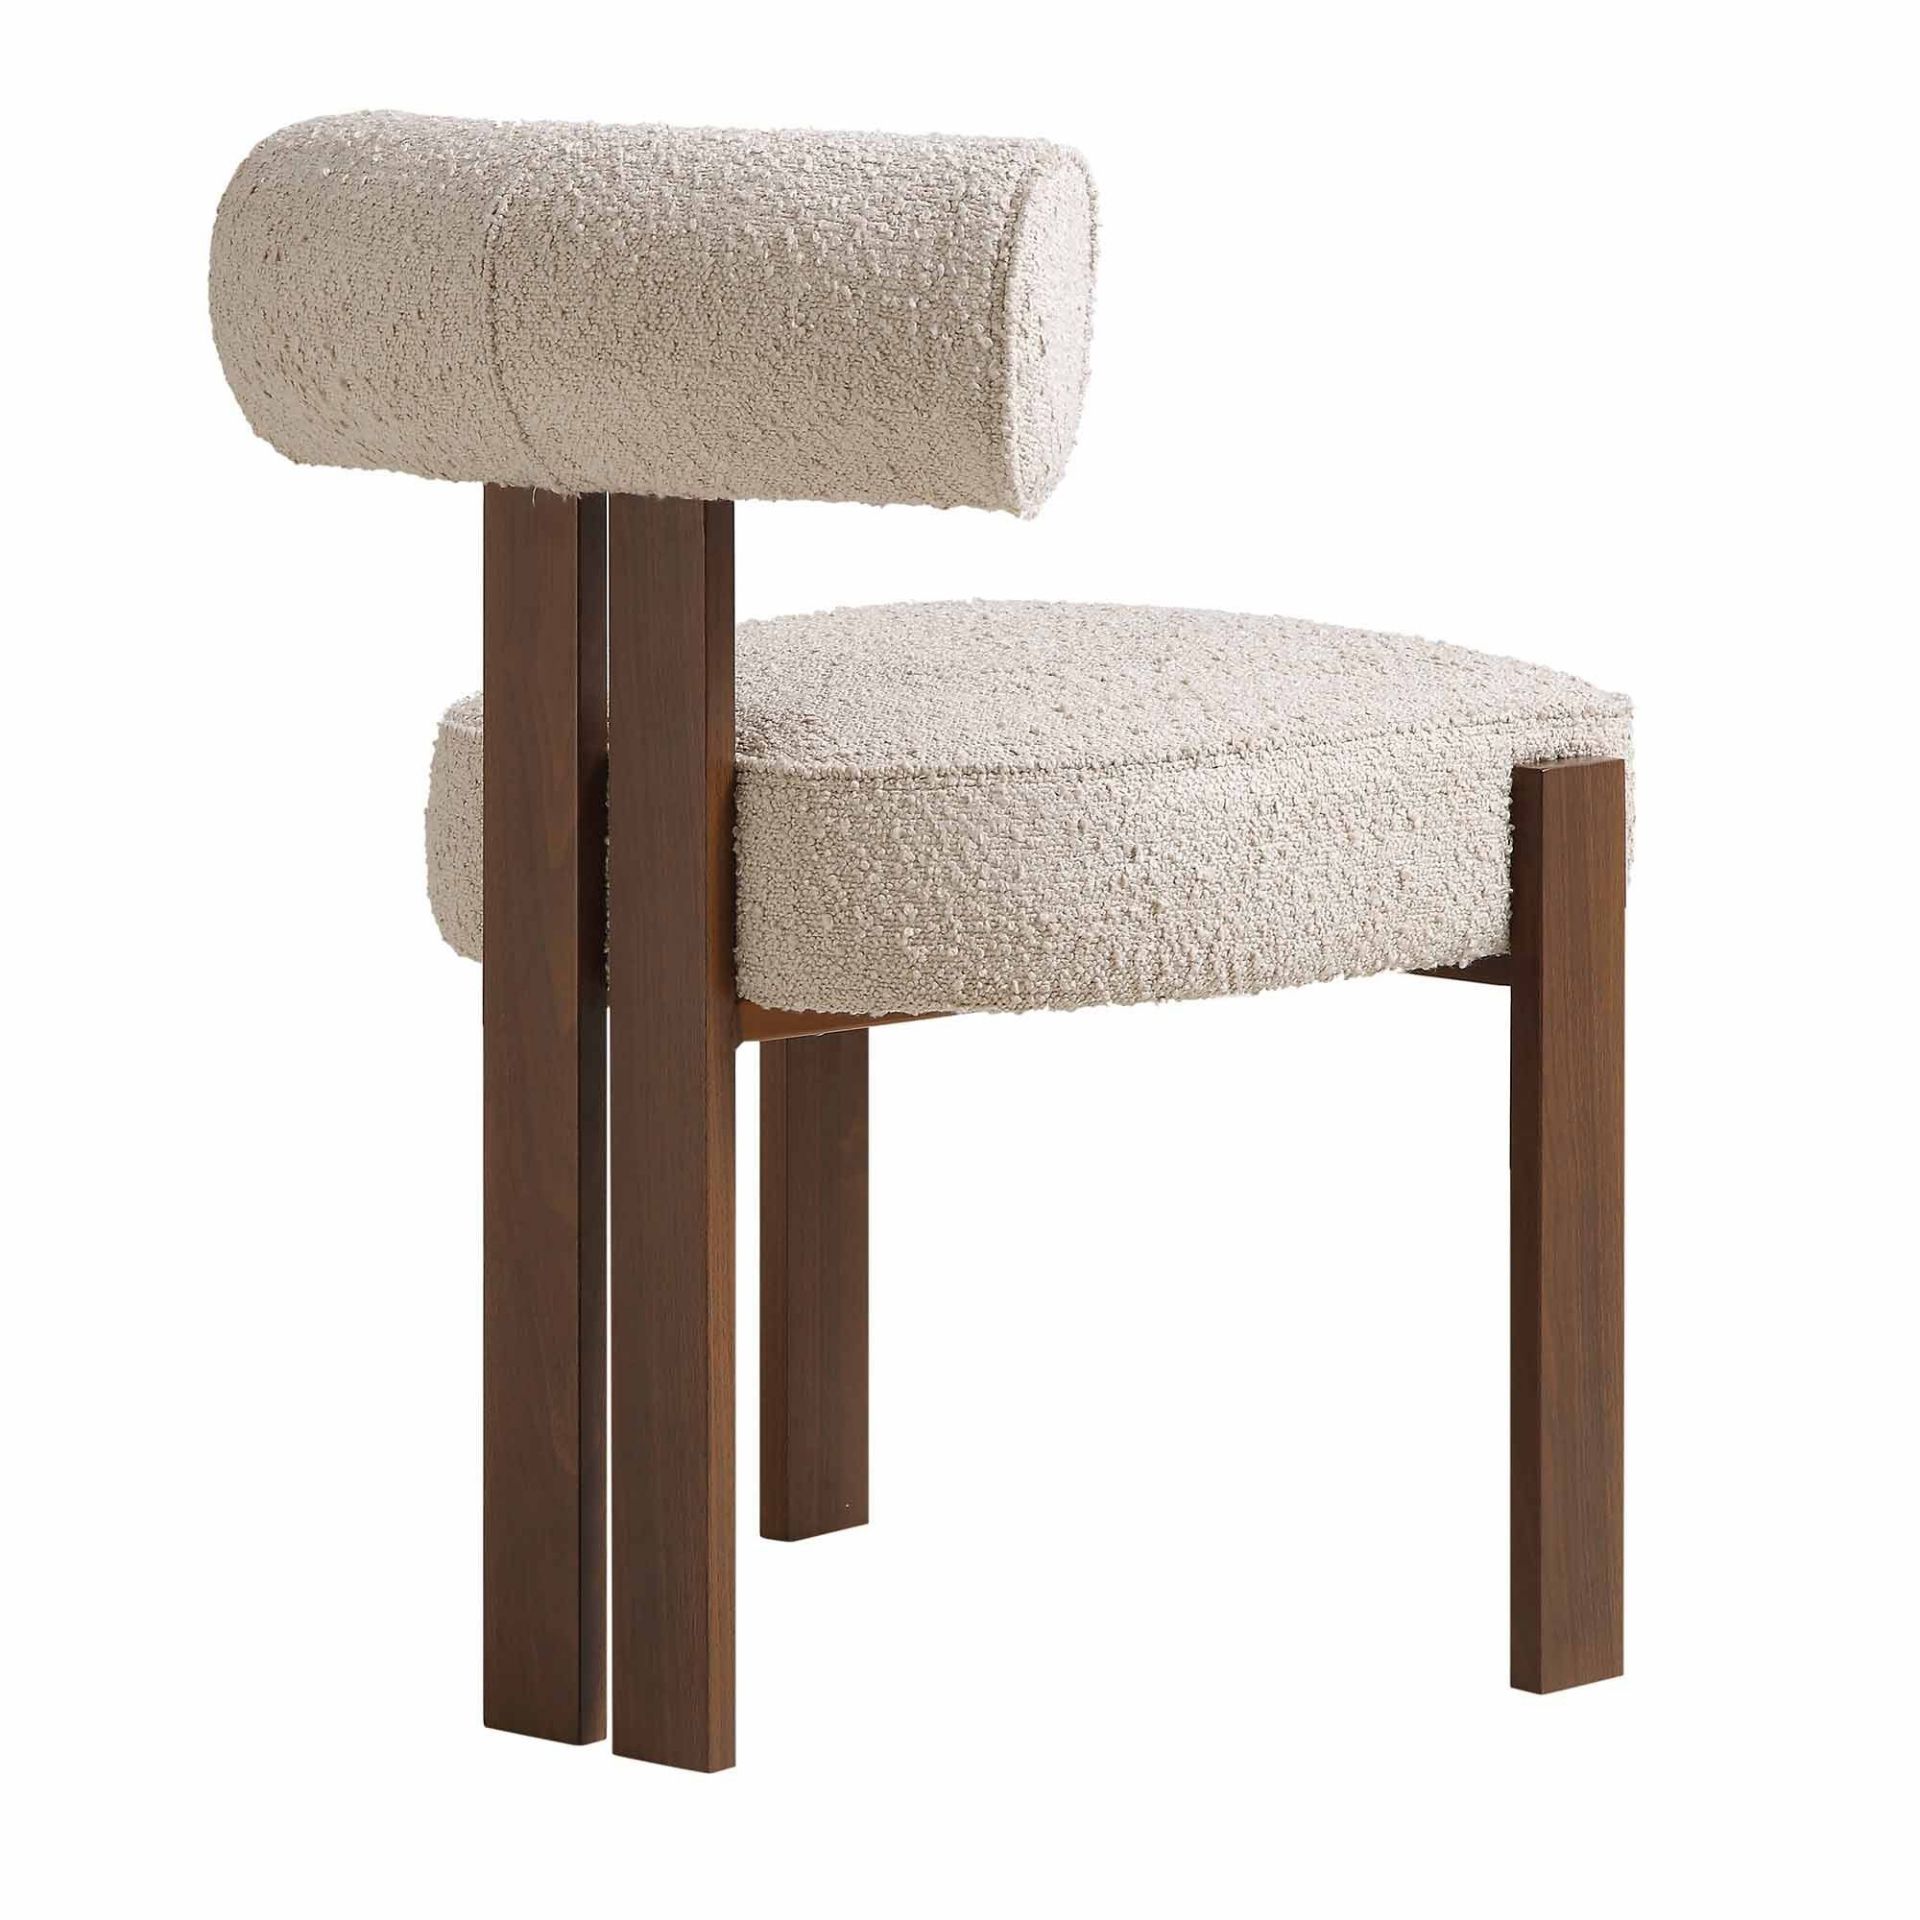 Ophelia Taupe Boucle Dining Chair. -R14. RRP £199.99. Combining chic taupe boucle upholstery and - Image 2 of 2